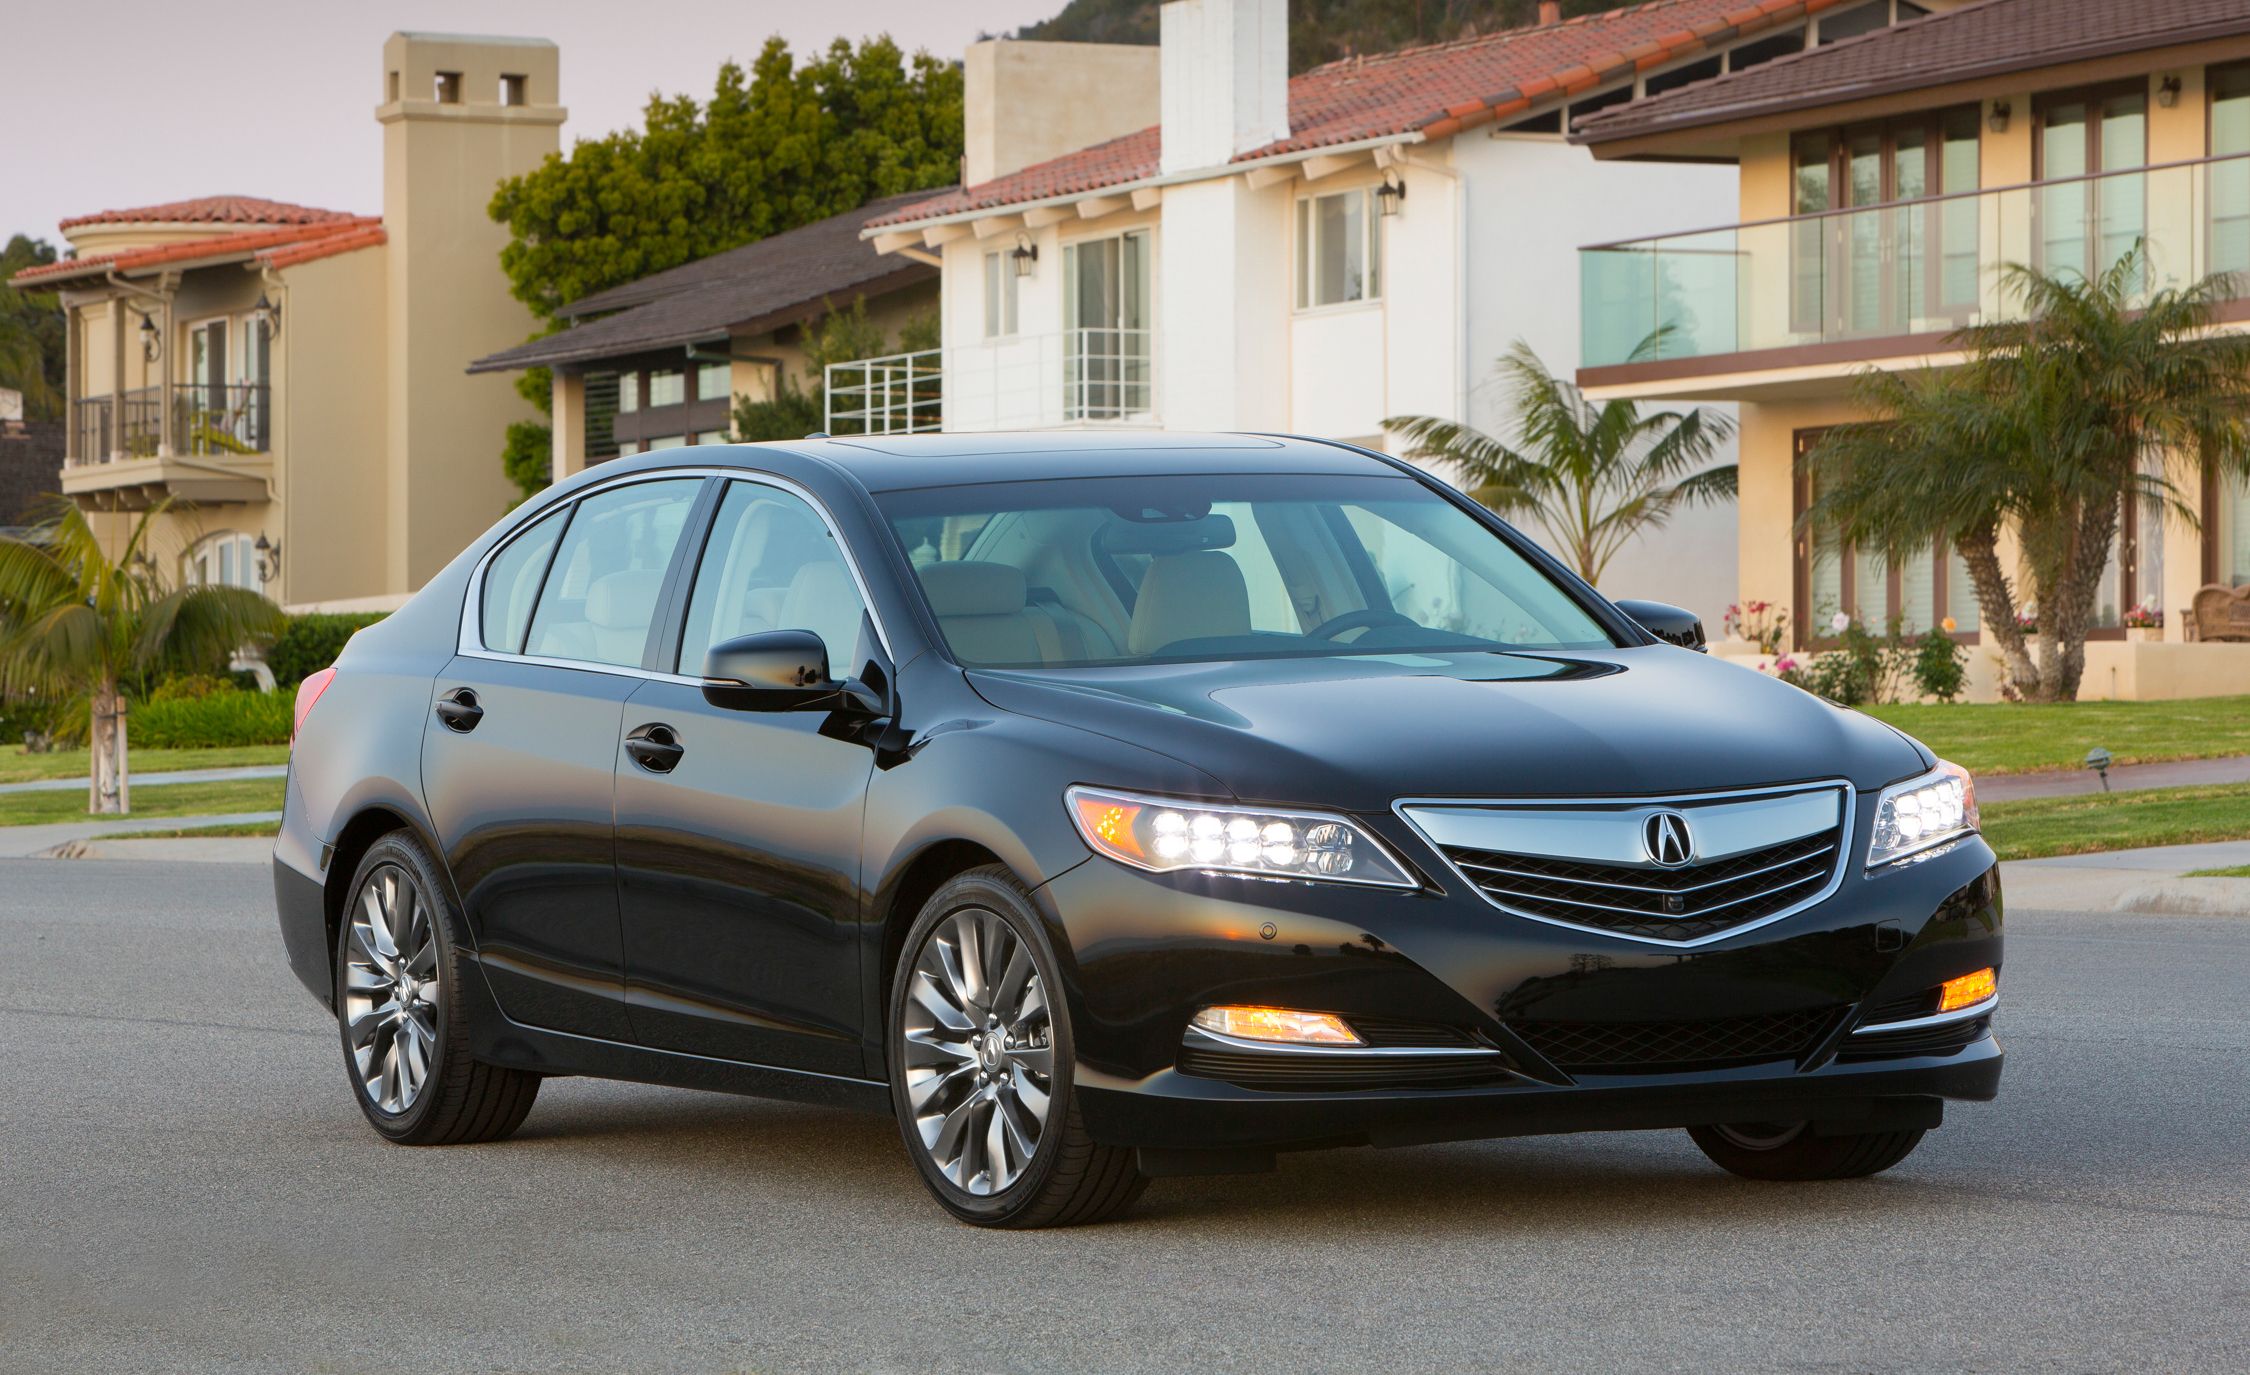 2017 Acura RLX Review, Pricing, and Specs